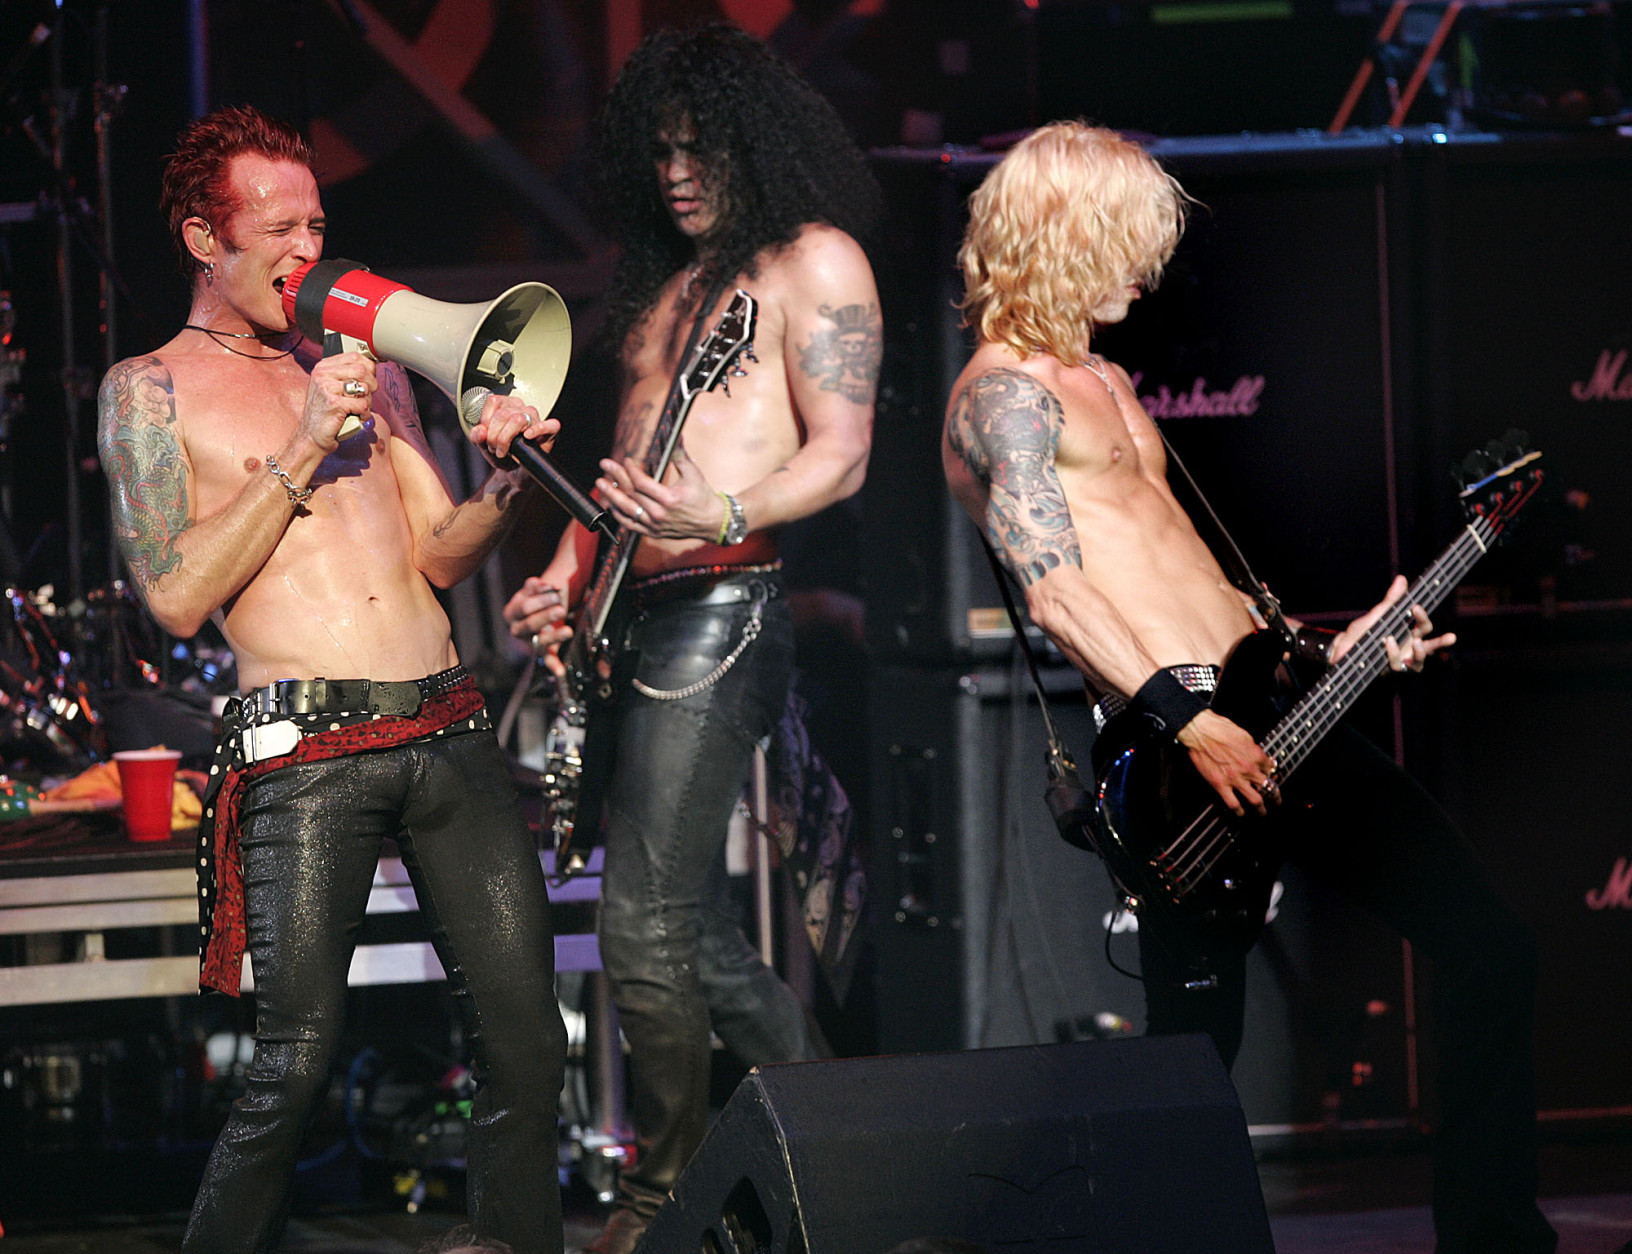 Scott Weiland, Slash and Duff McKagan of Velvet Revolver perform during the 2004 KROQ Almost Acoustic Christmas at the Universal Amphitheatre in Universal City, Calif., Sunday, Dec. 12, 2004.  (AP Photo/Chris Polk)